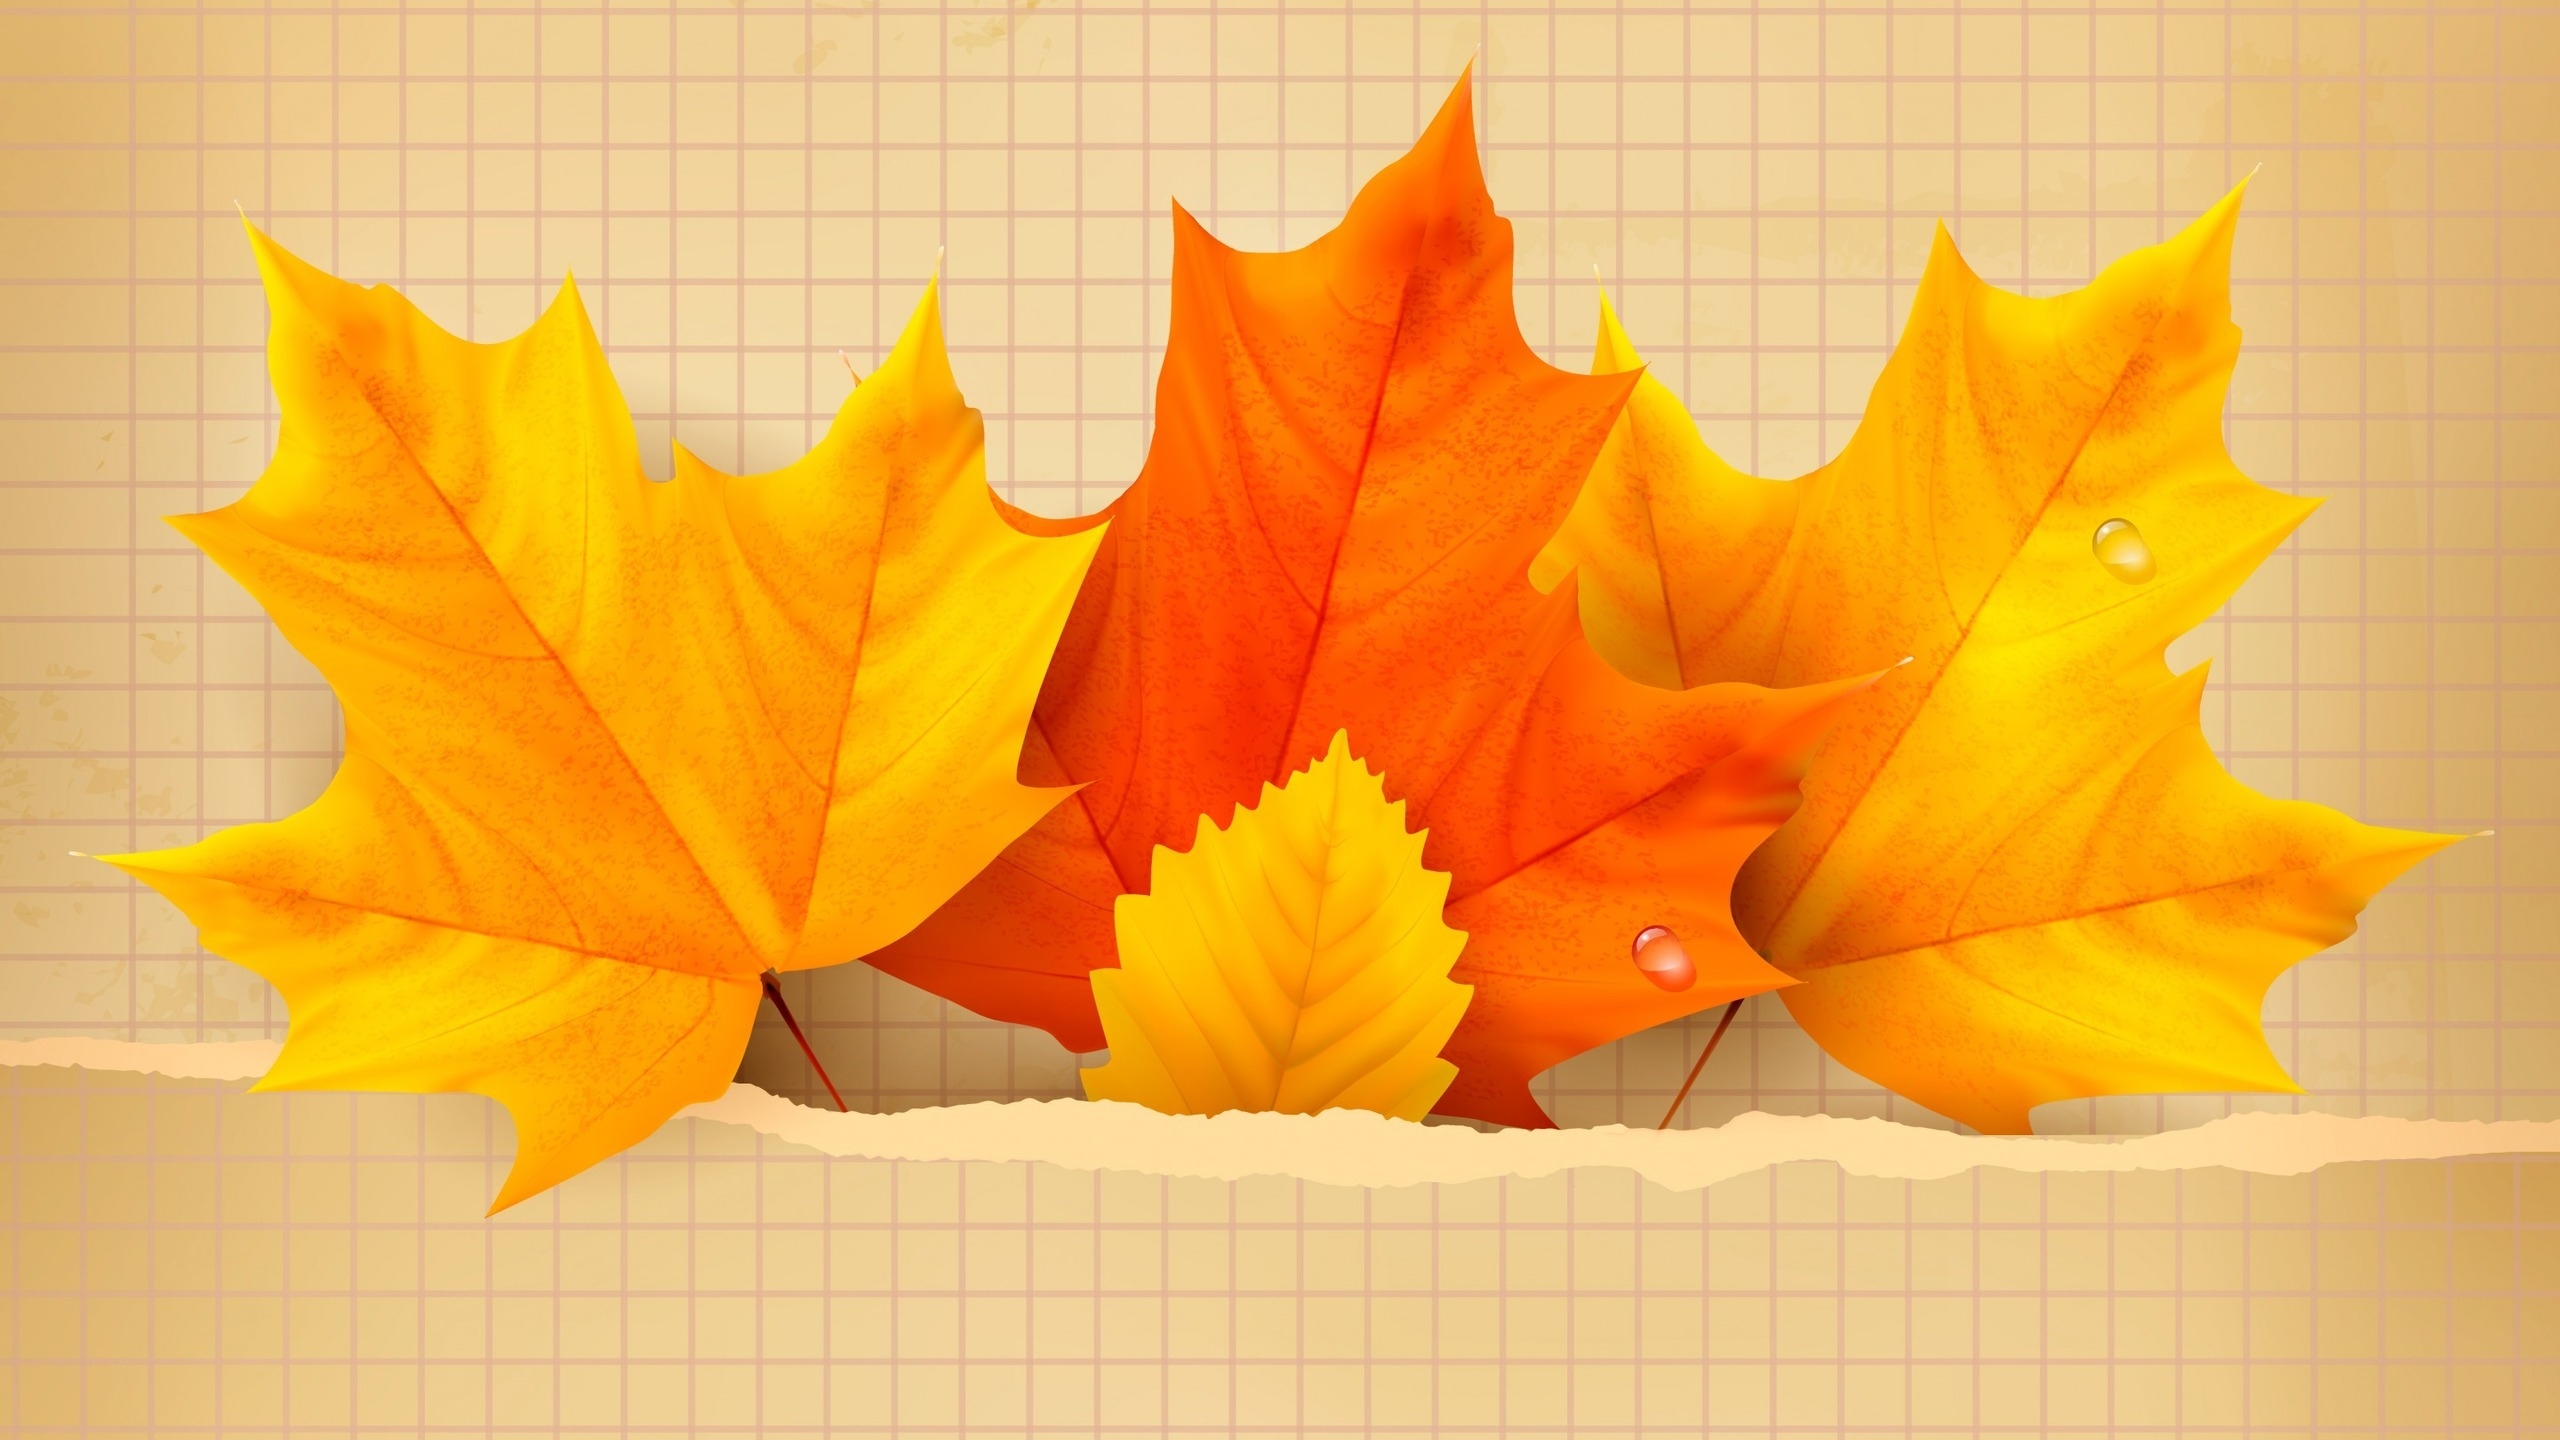 3 Beautiful Autumn Leaves for 2560x1440 HDTV resolution